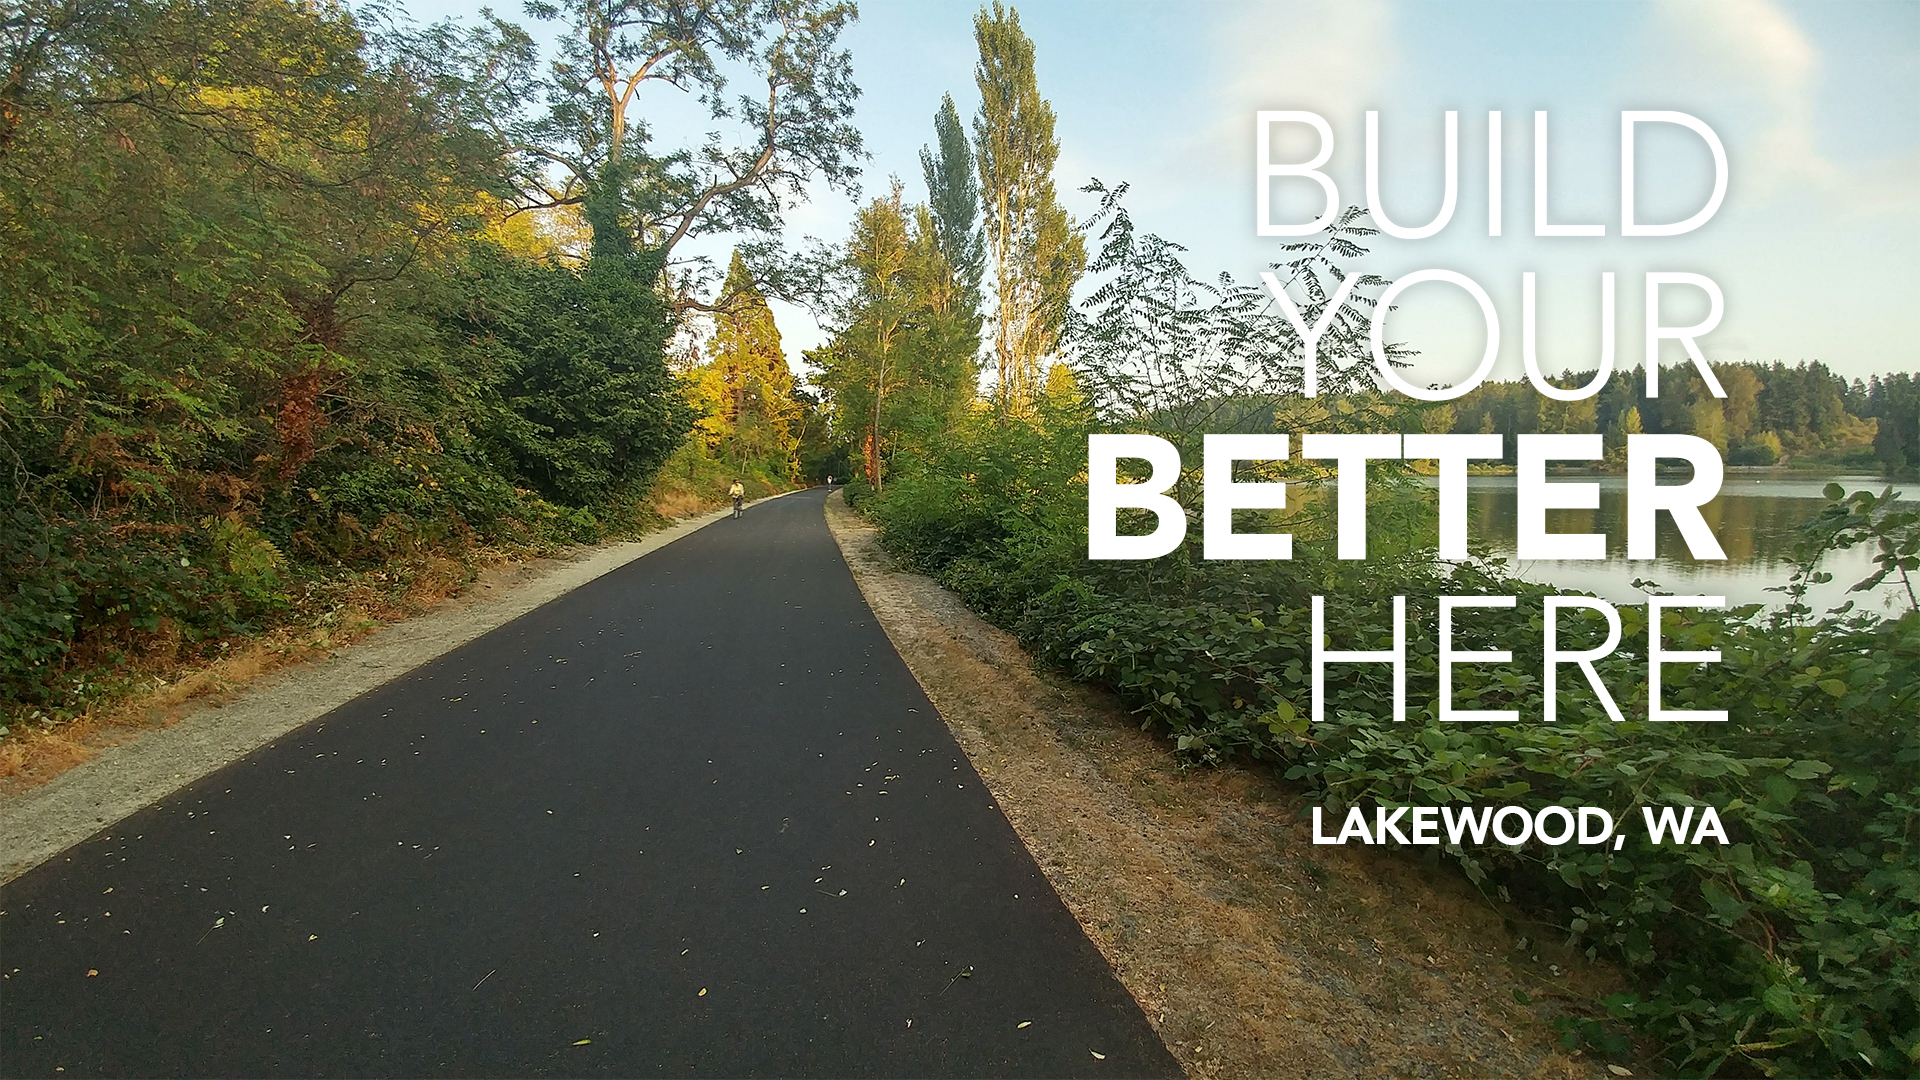 Waughop Lake paved trail through Lakewood, WA with Build Your Better Here Lakewood, WA on right side